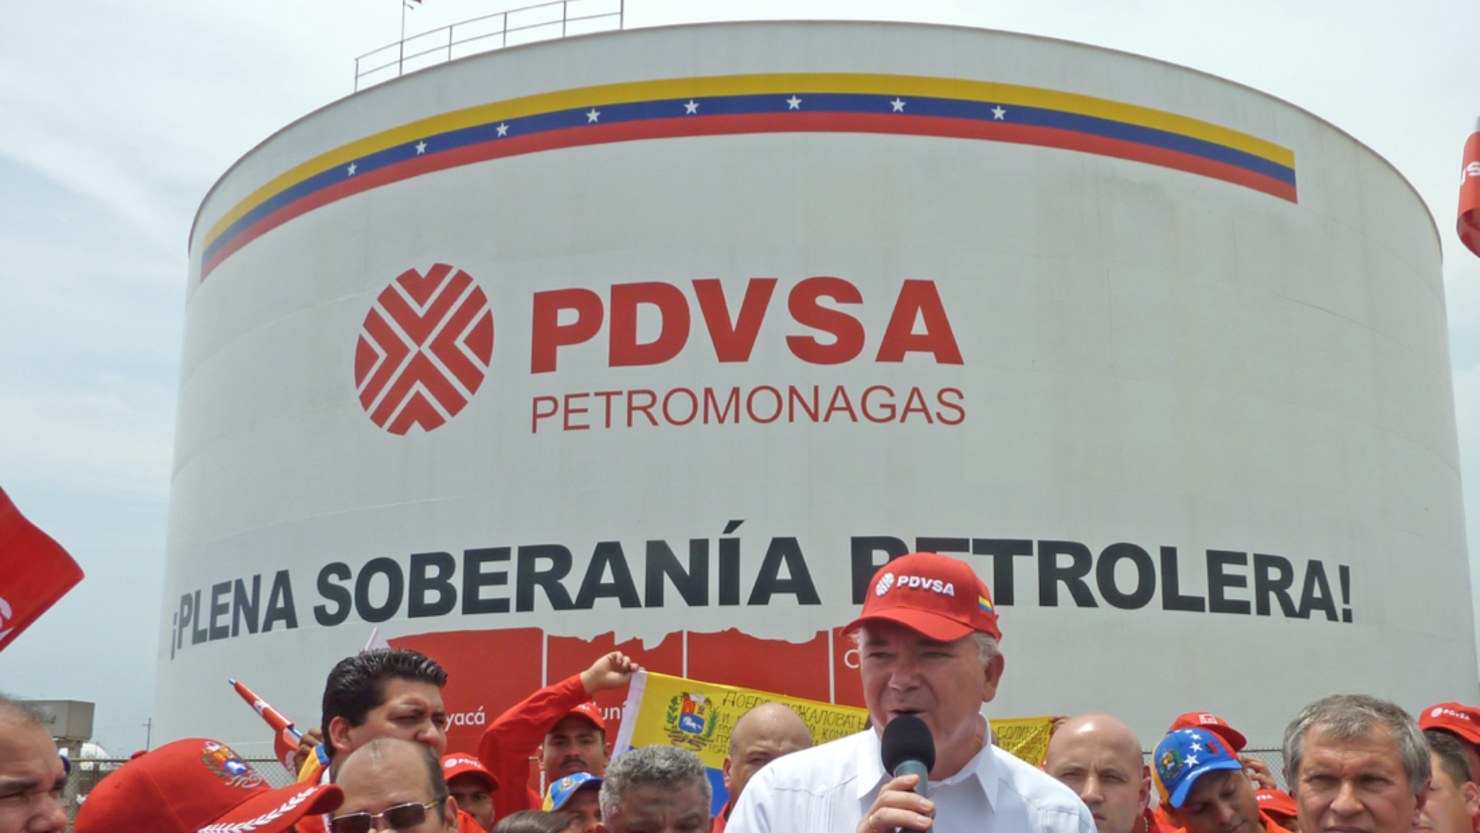 Two former executives of Venezuela's national oil company have been detained, officials said.